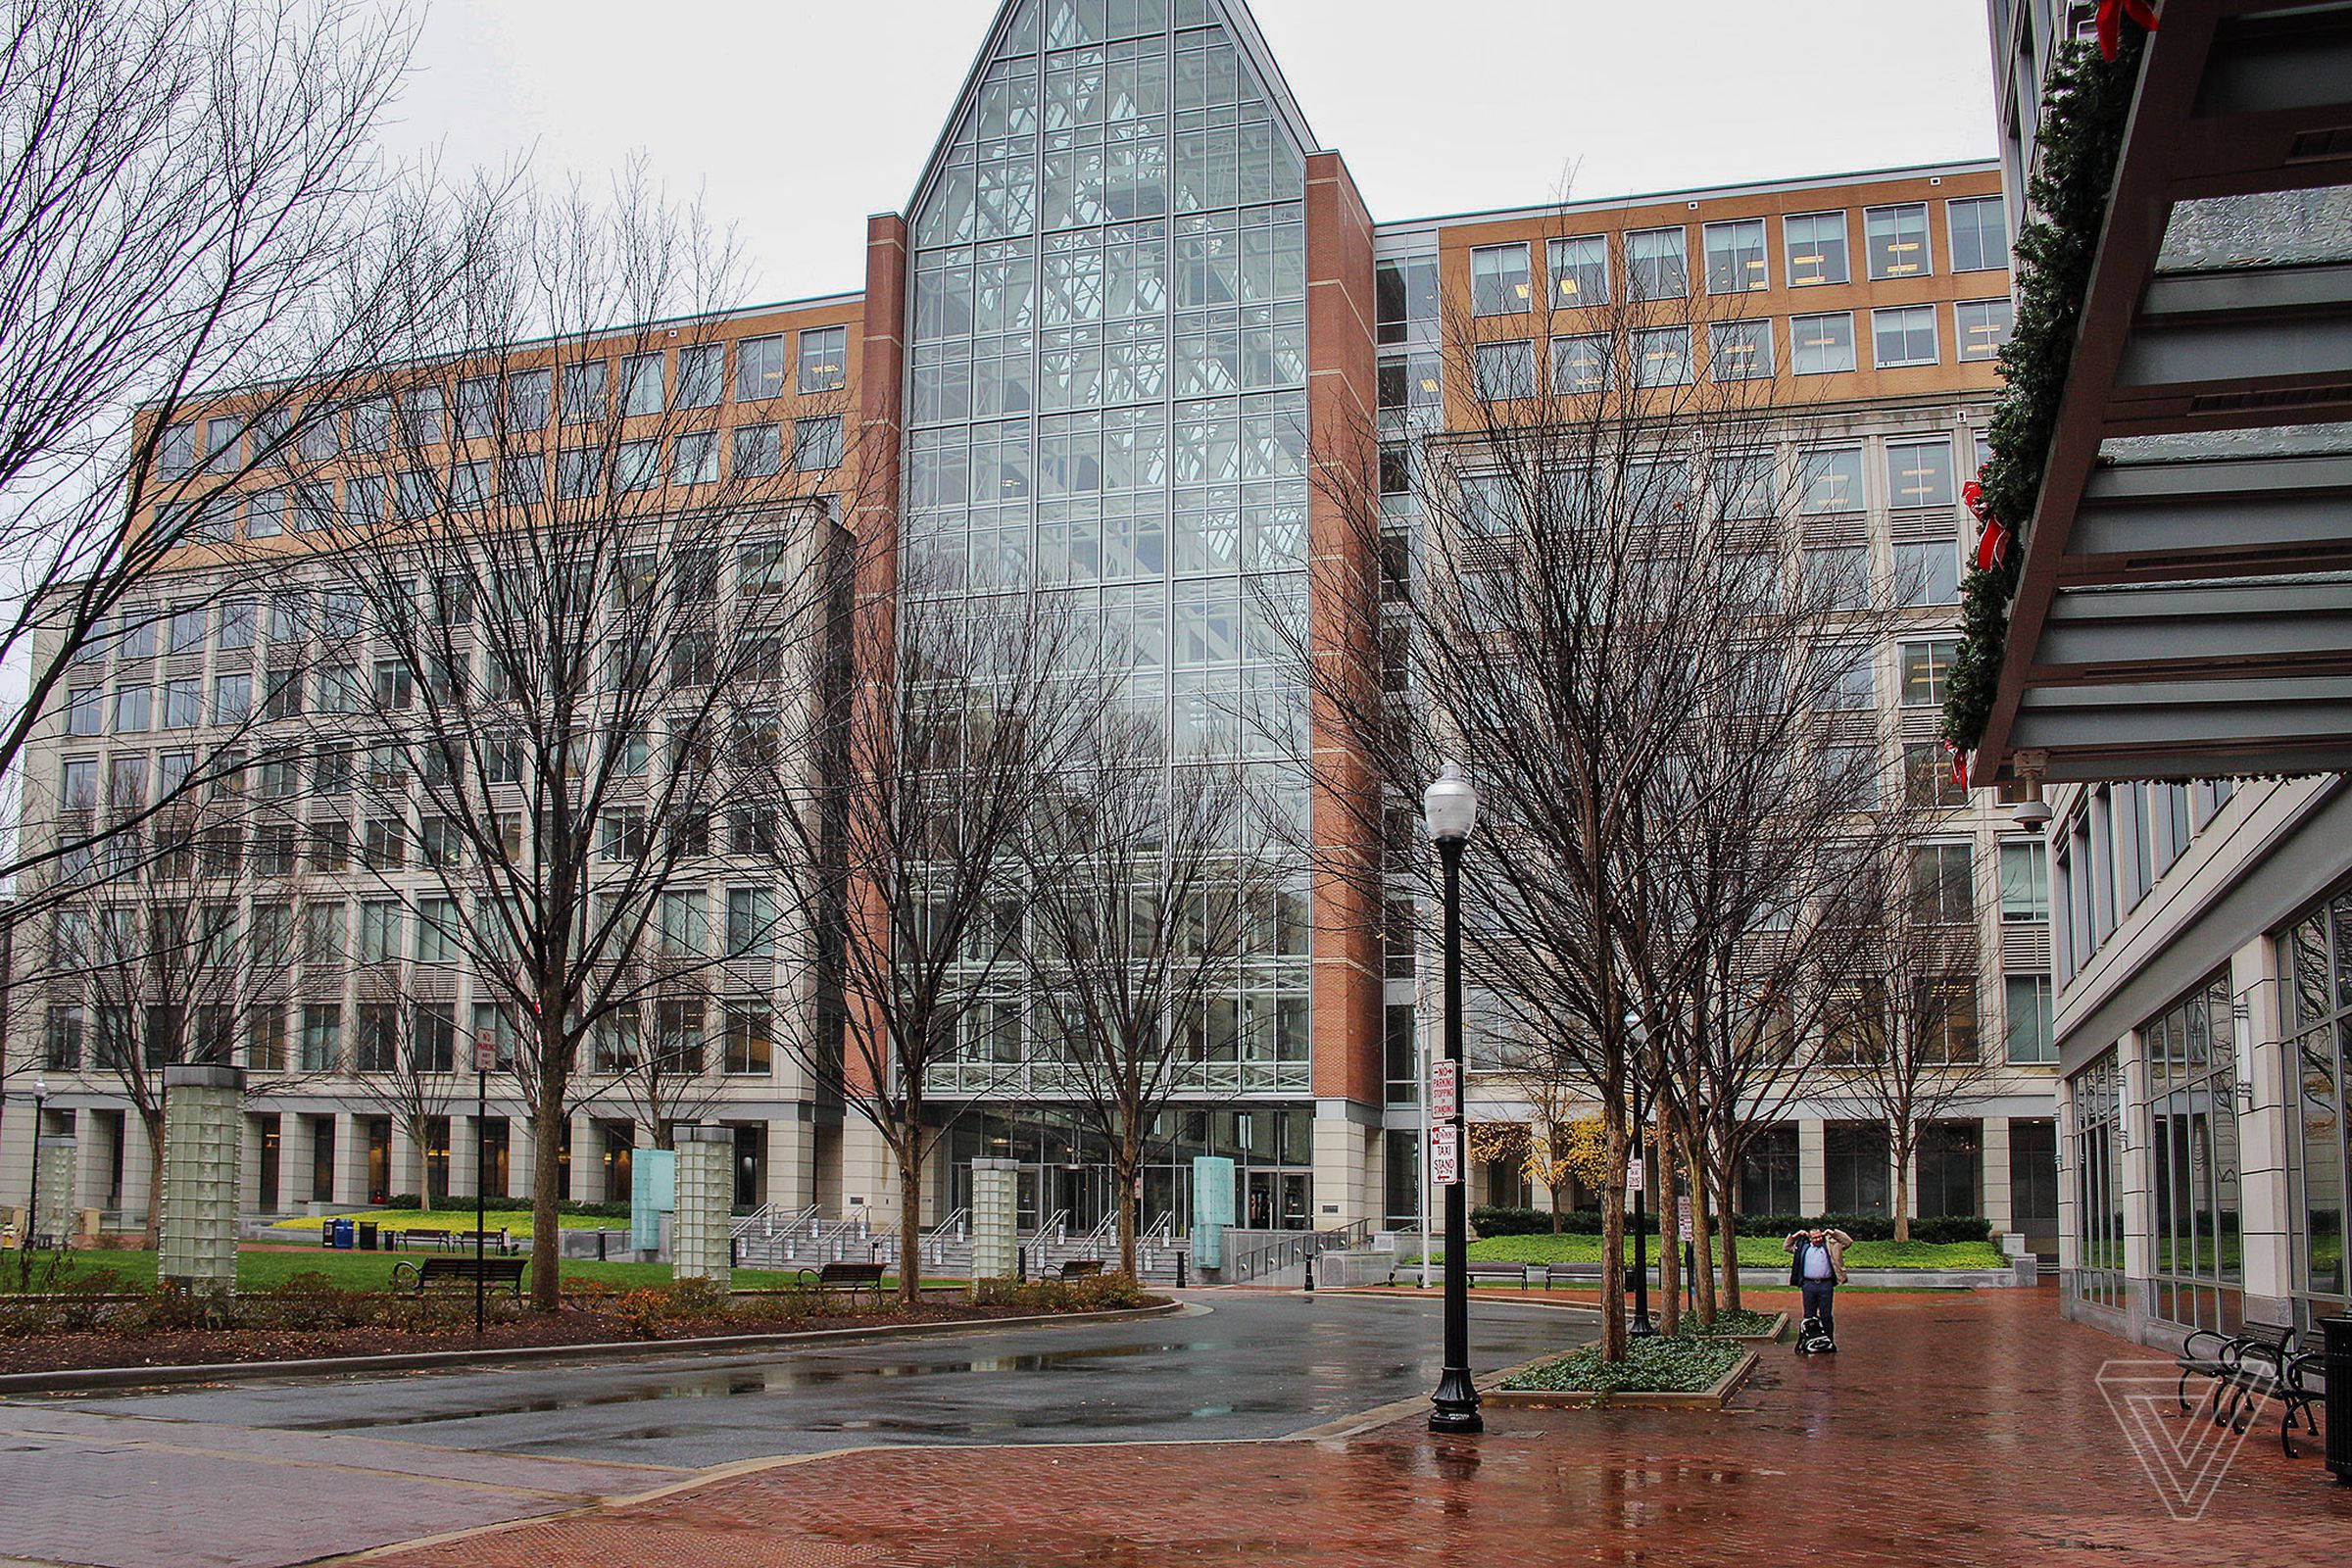 The United States Patent and Trademark Office in Alexandria, Virginia